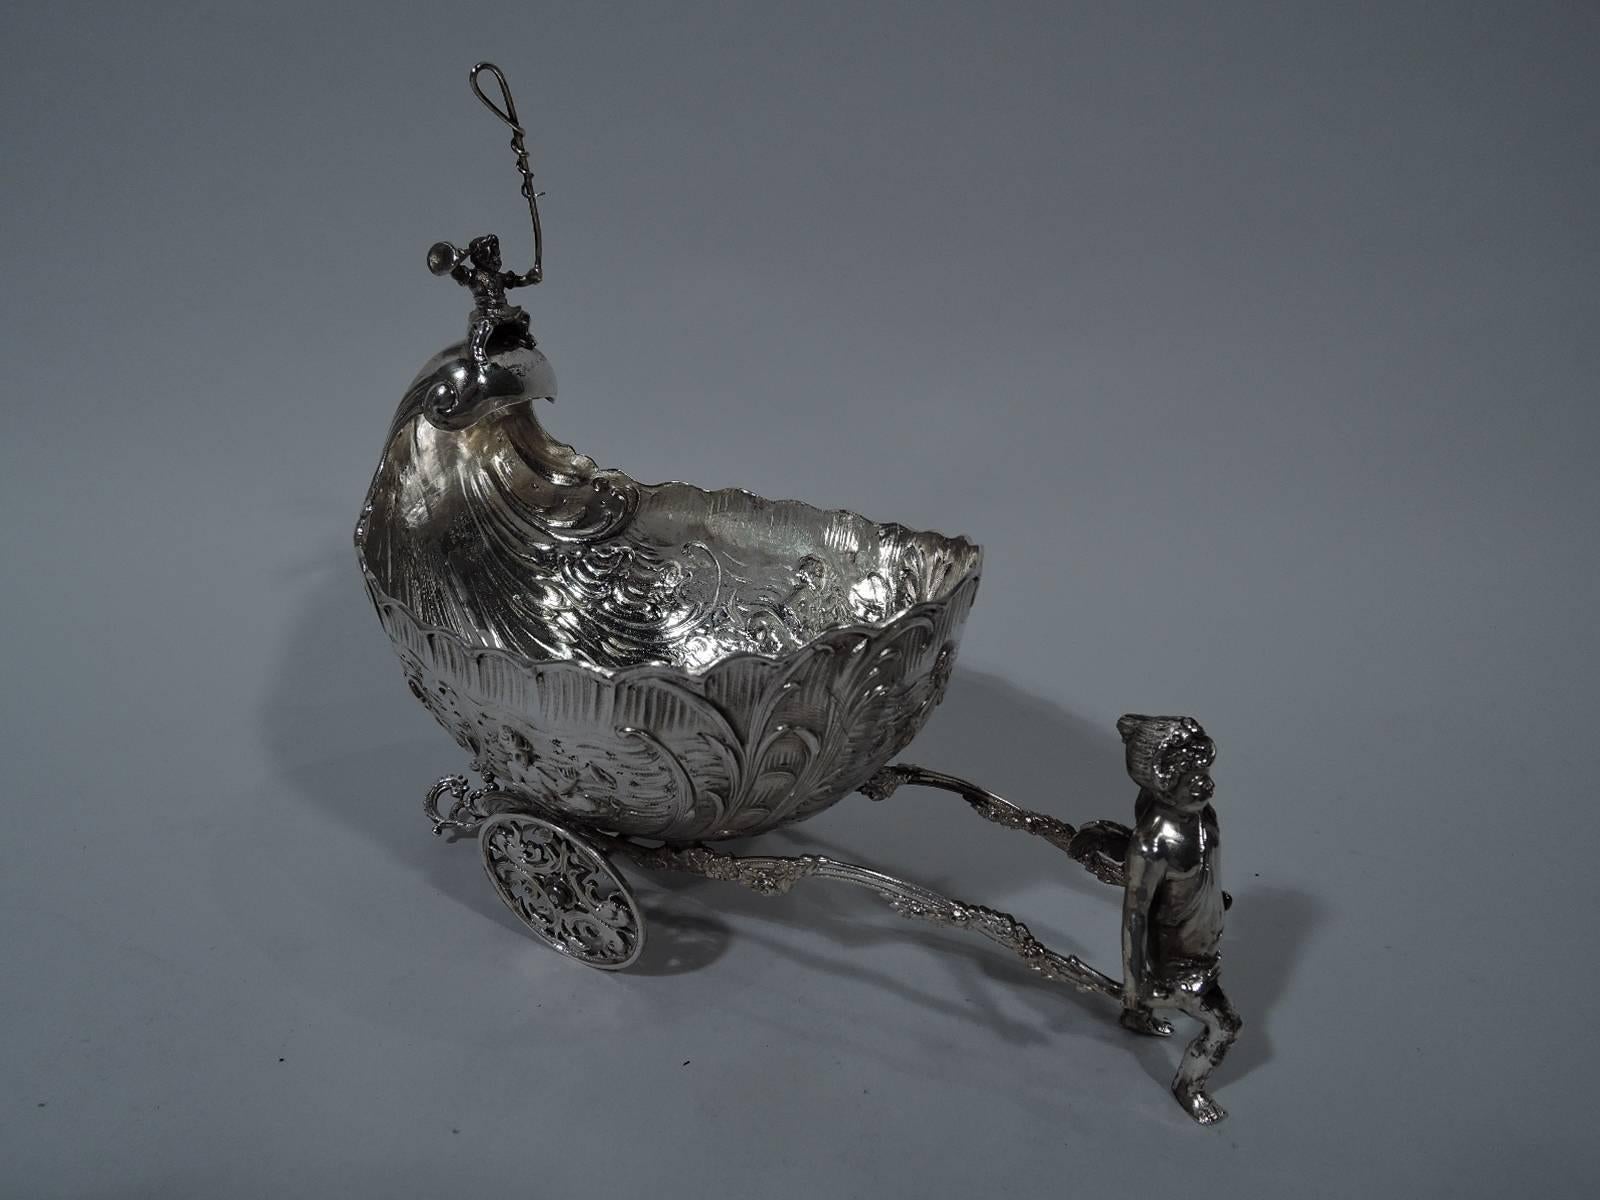 Antique German 800 silver love chariot. The vehicle is decorated with cherubic Neptunes frolicking in the water. It has a wavy rim and rising spiral on which is mounted an infant postilion with bugle and whip (!), and is harnessed to a winged cupid